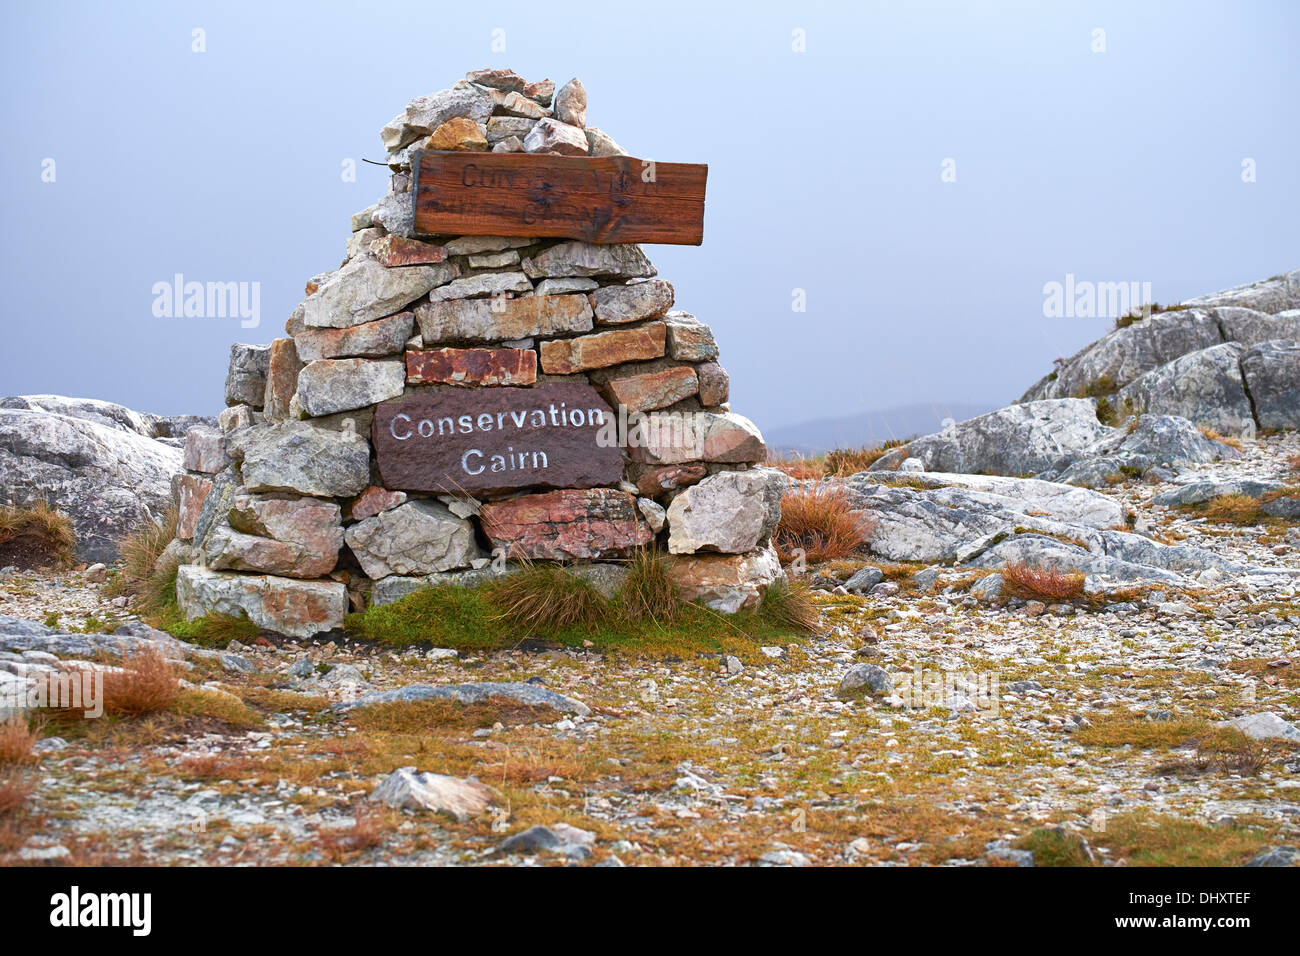 Conservation Cairn on the Mountain Trail, Beinn Eighe, Scottish Highlands. Stock Photo